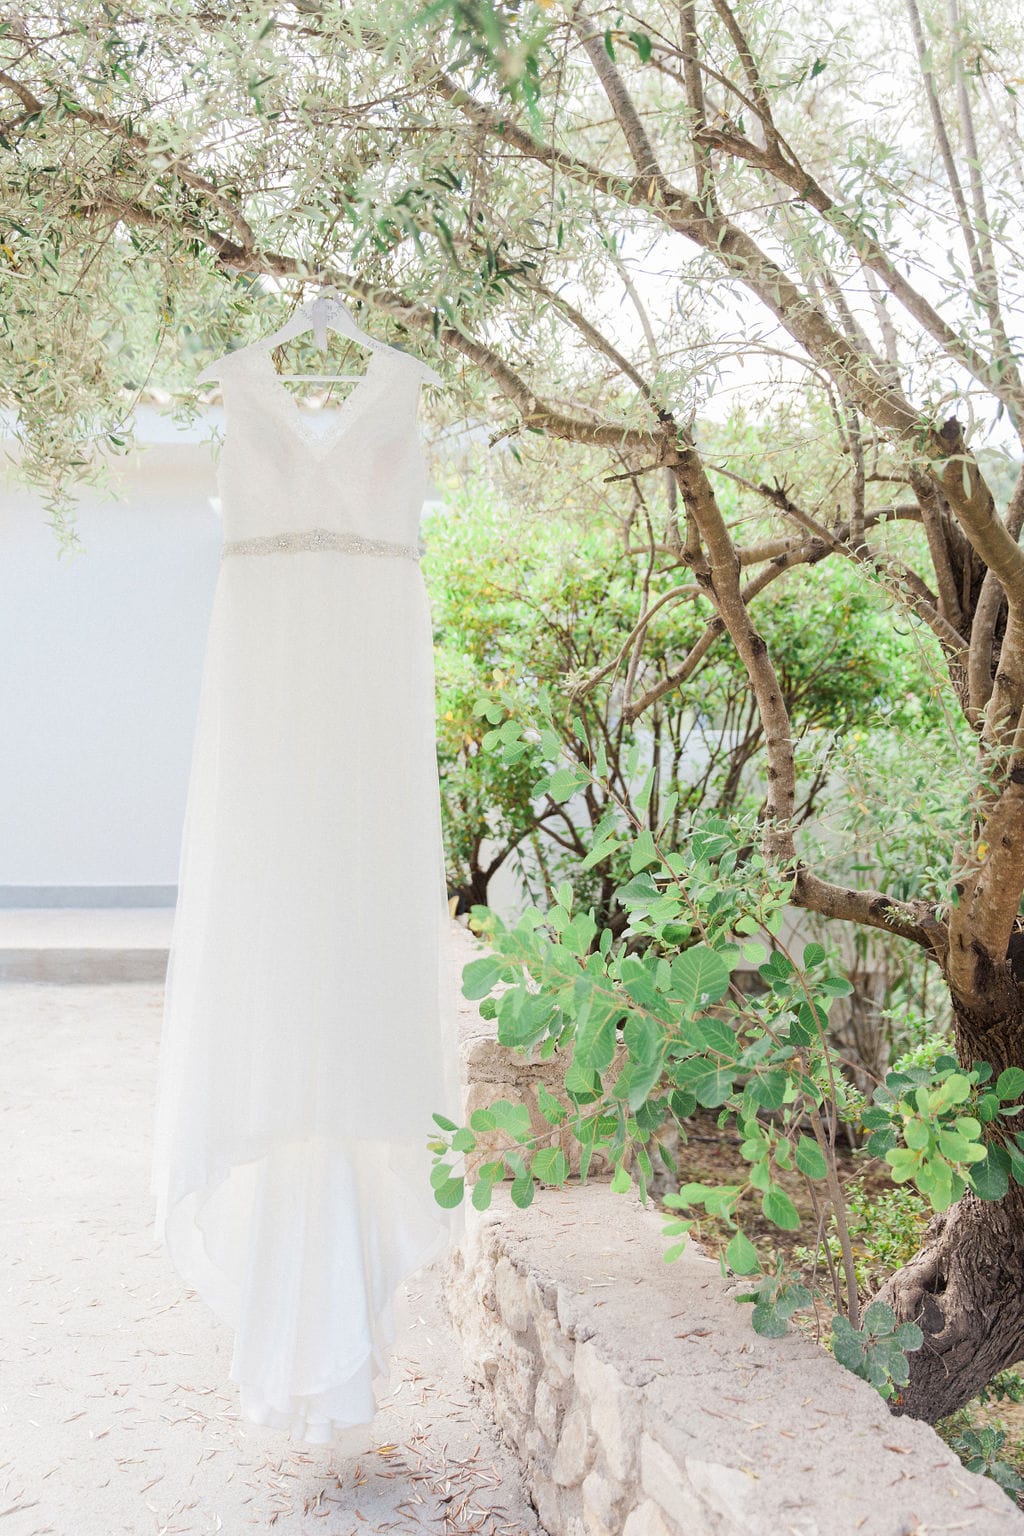 Lauren & Mark's Intimate Greek Island Wedding Abroad | planned by Lefkas Wedding | Photography by Maxeen Kim Photography